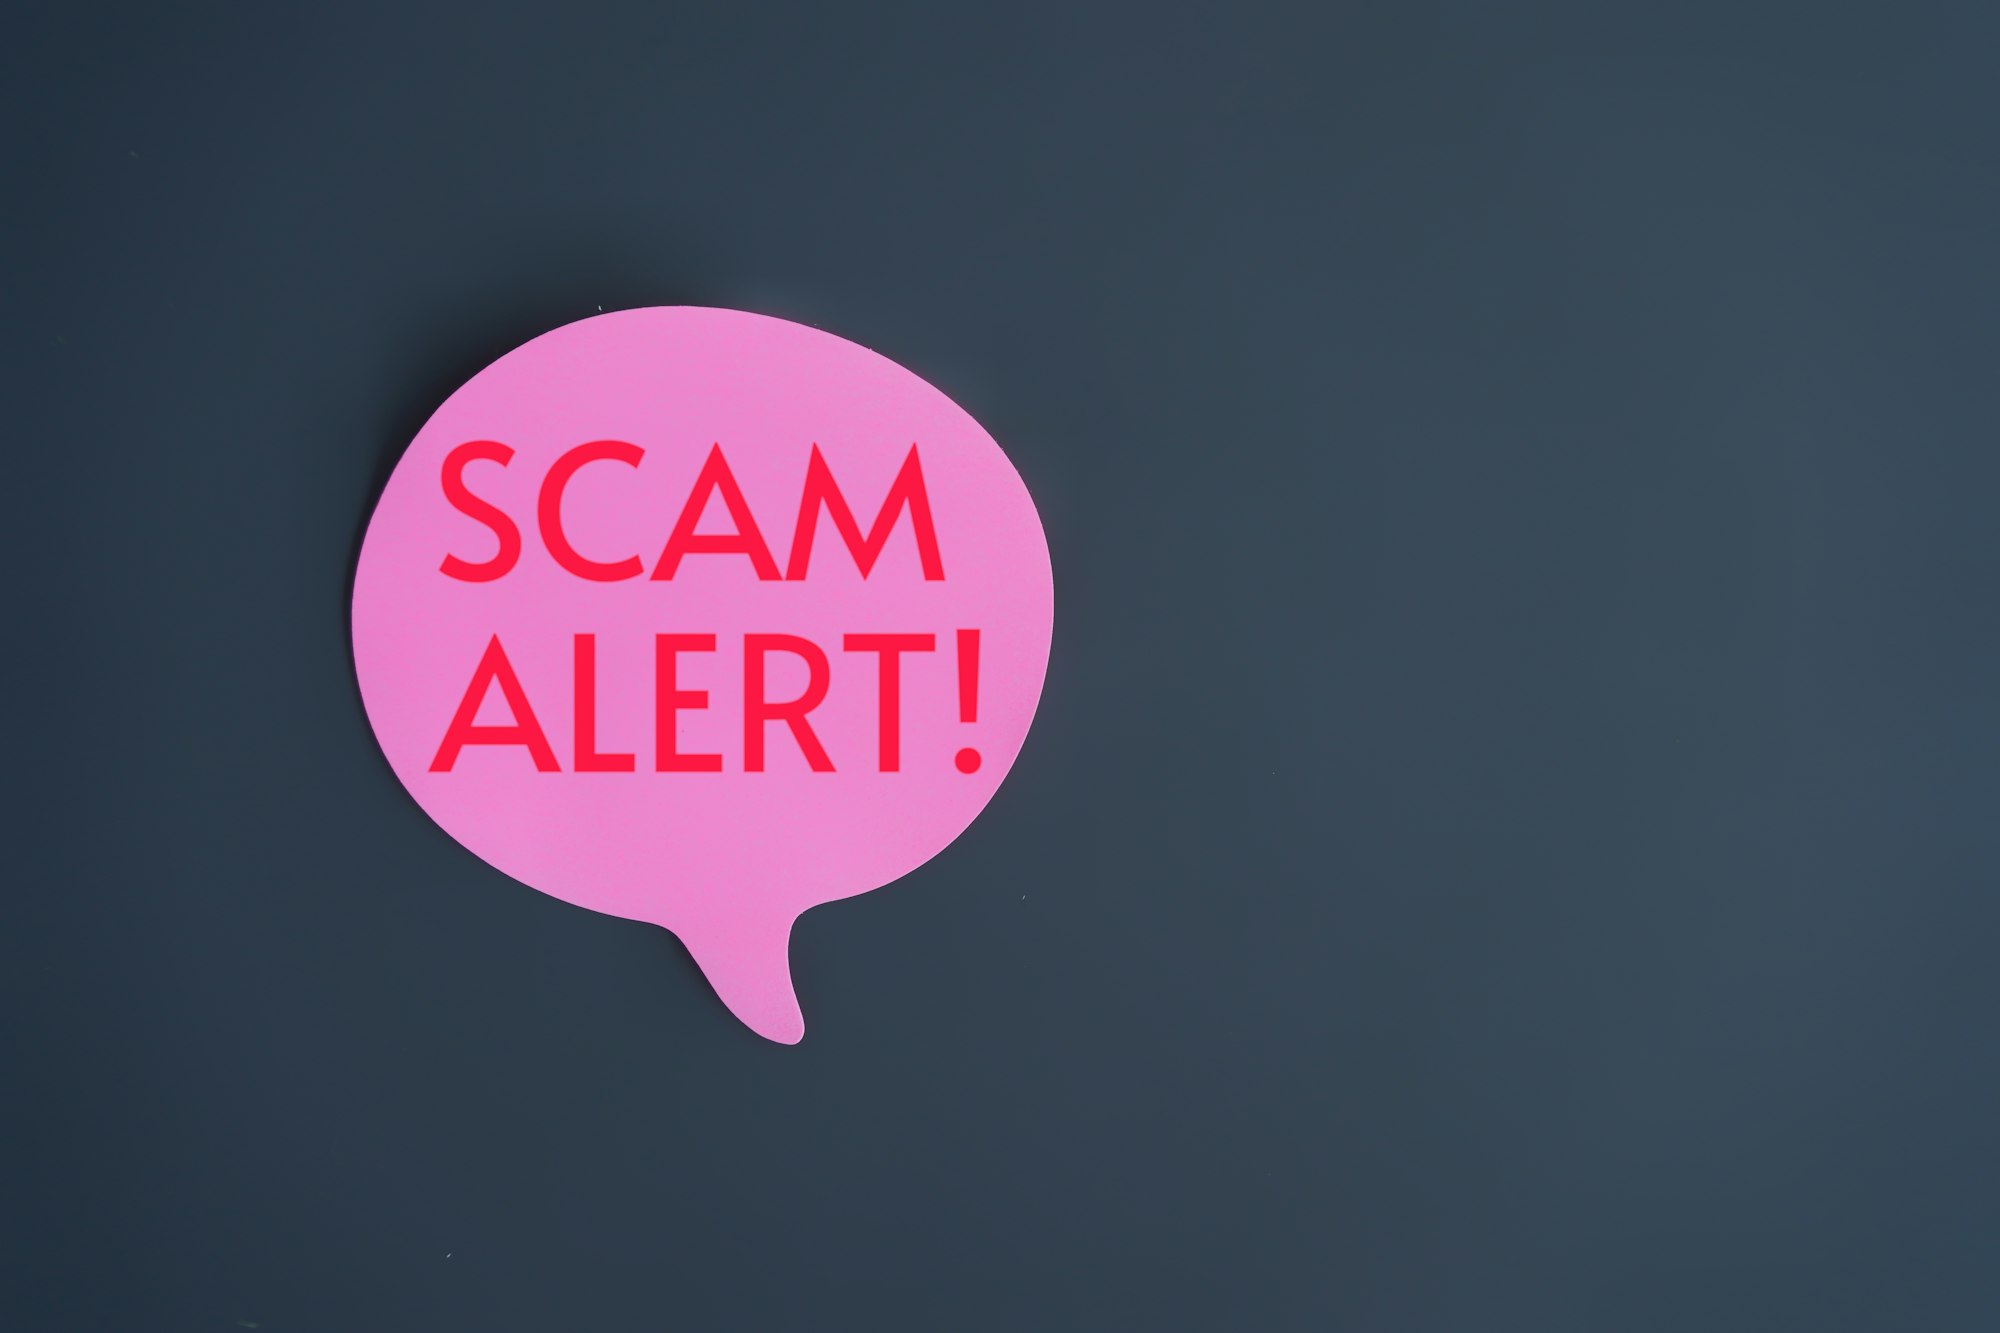 Top view image of speech bubble with text SCAM ALERT!.